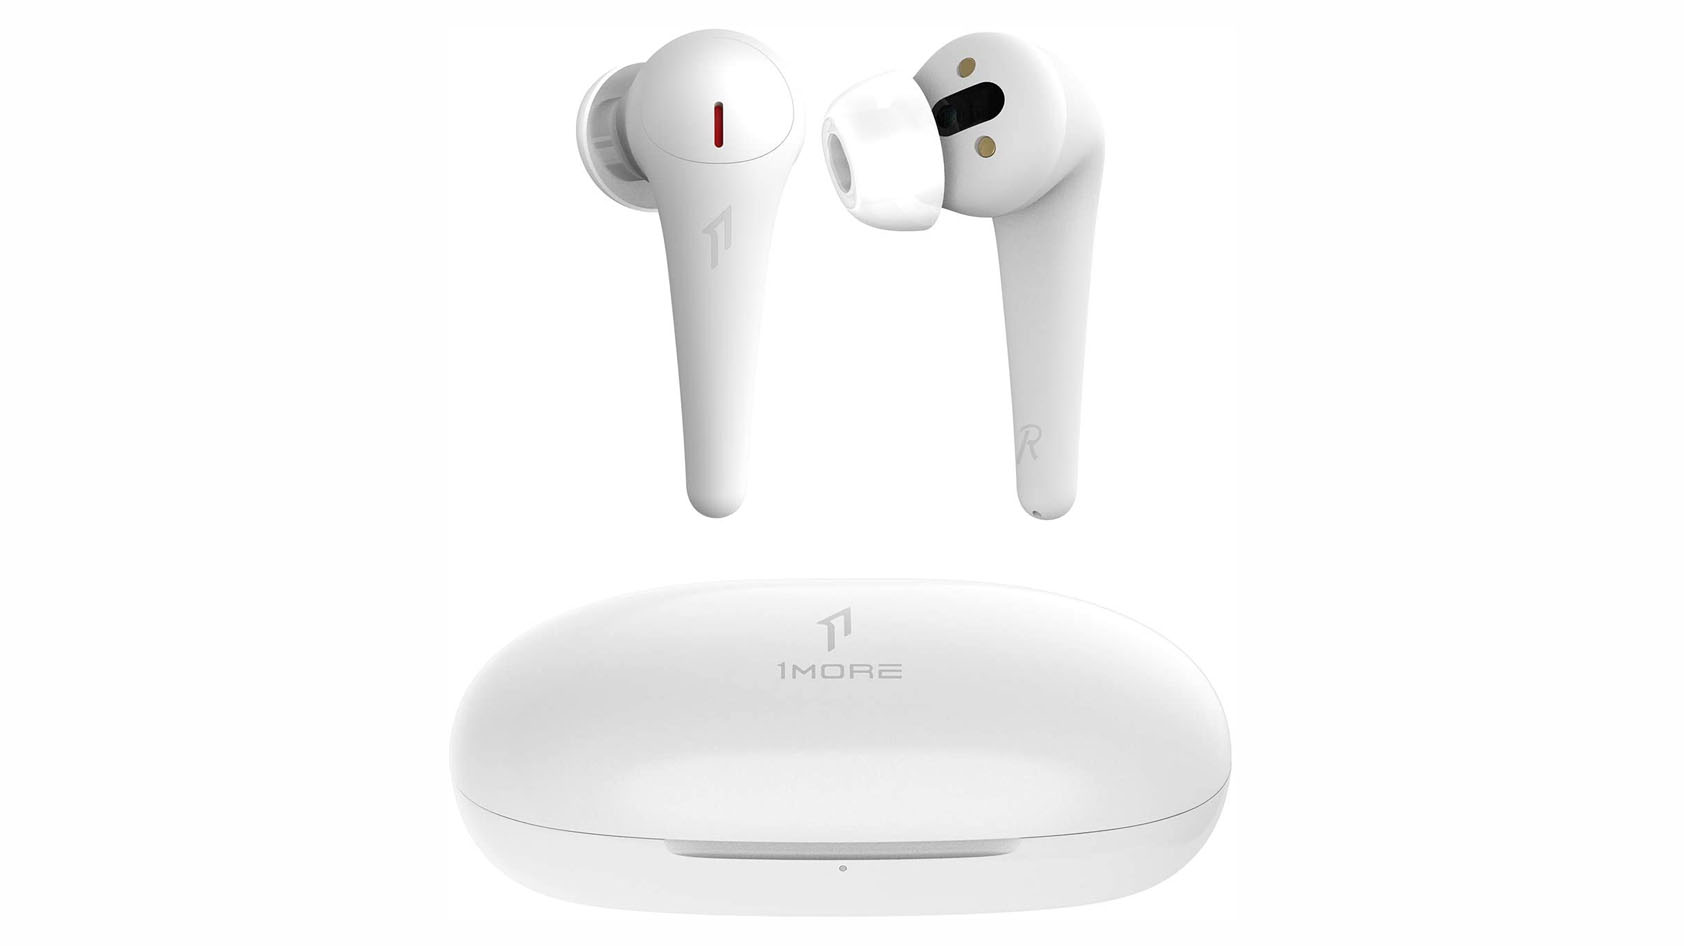 The 1MORE ComfoBuds Pro noise canceling true wireless earphones in white against a white background.